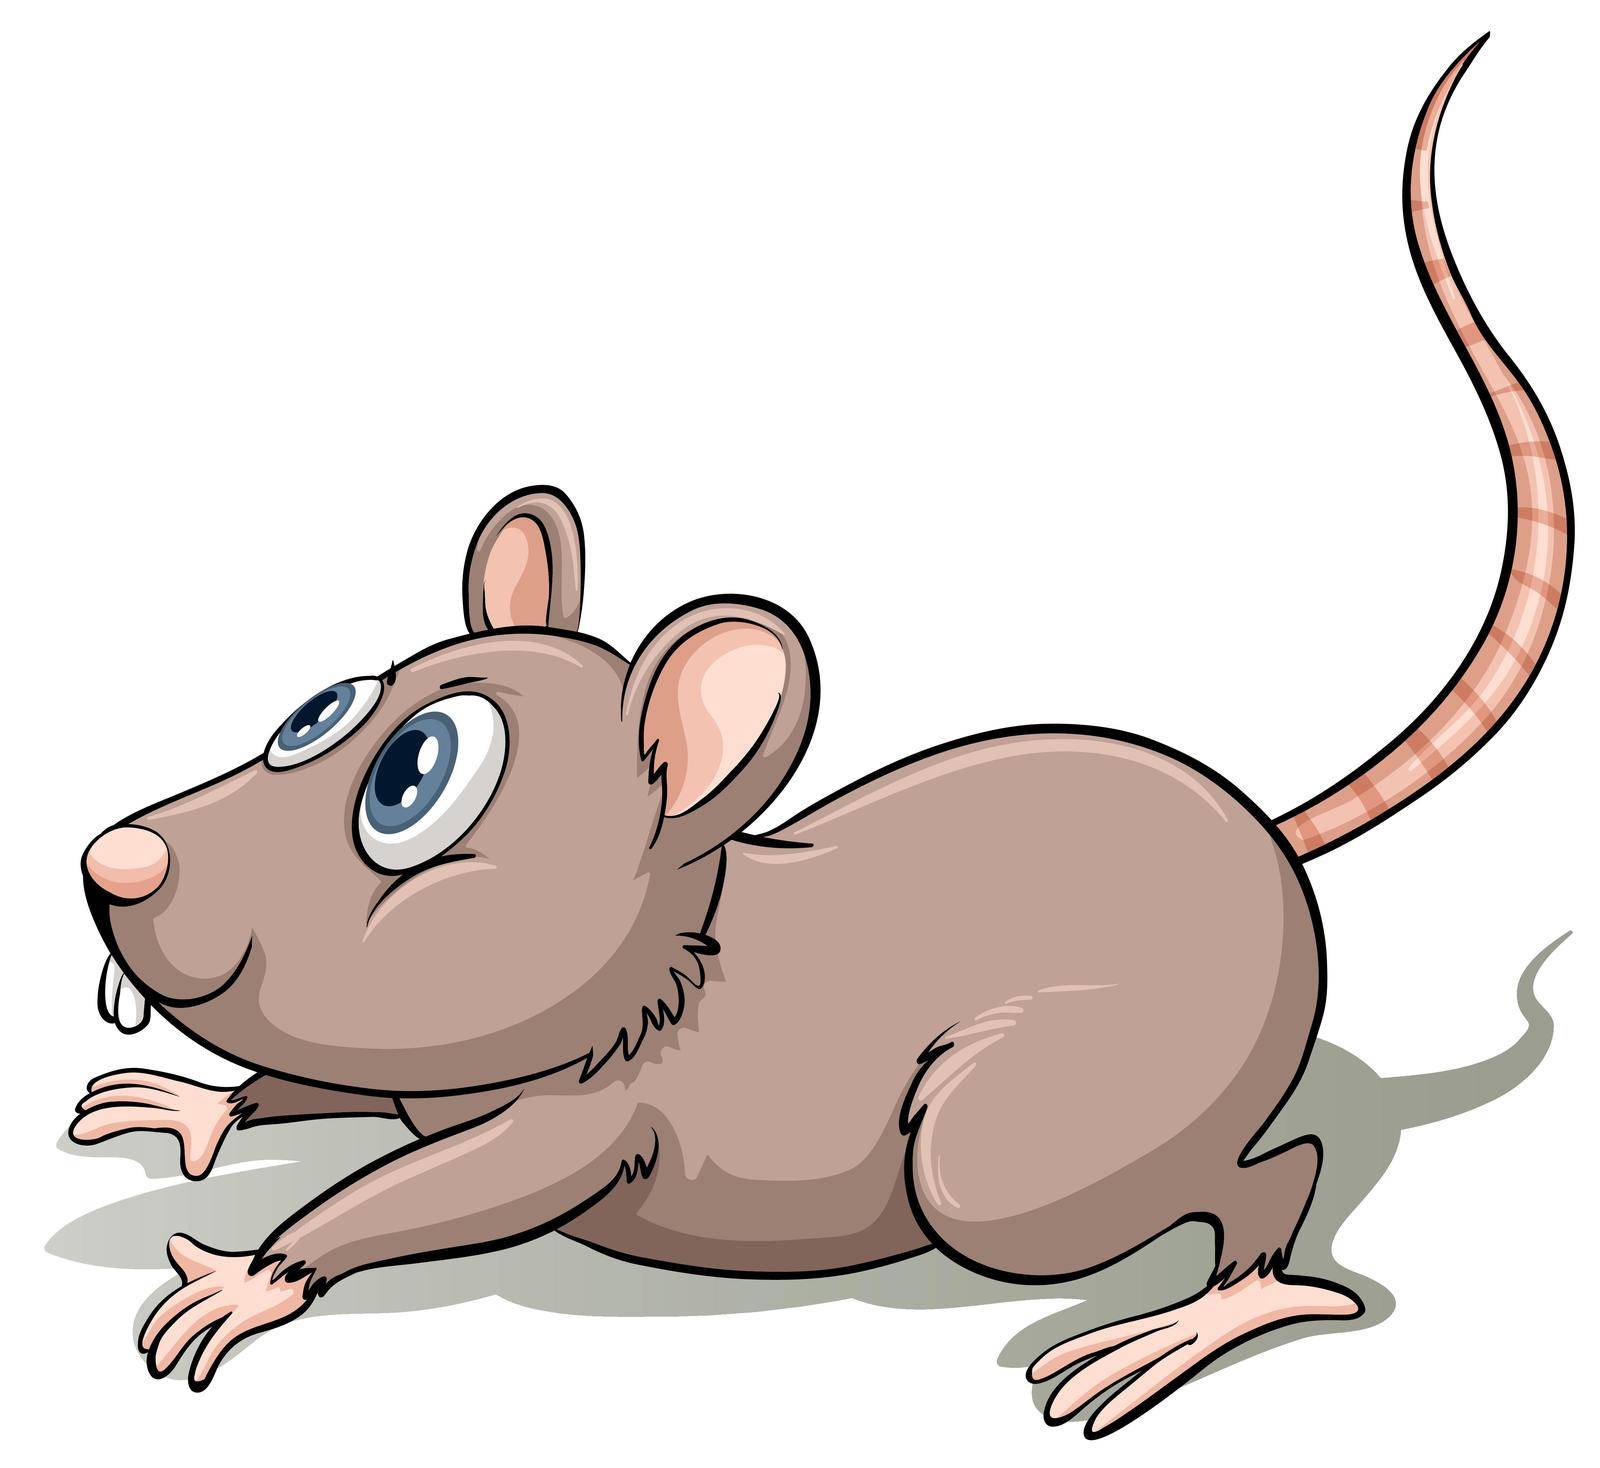 One gray mouse on a white background